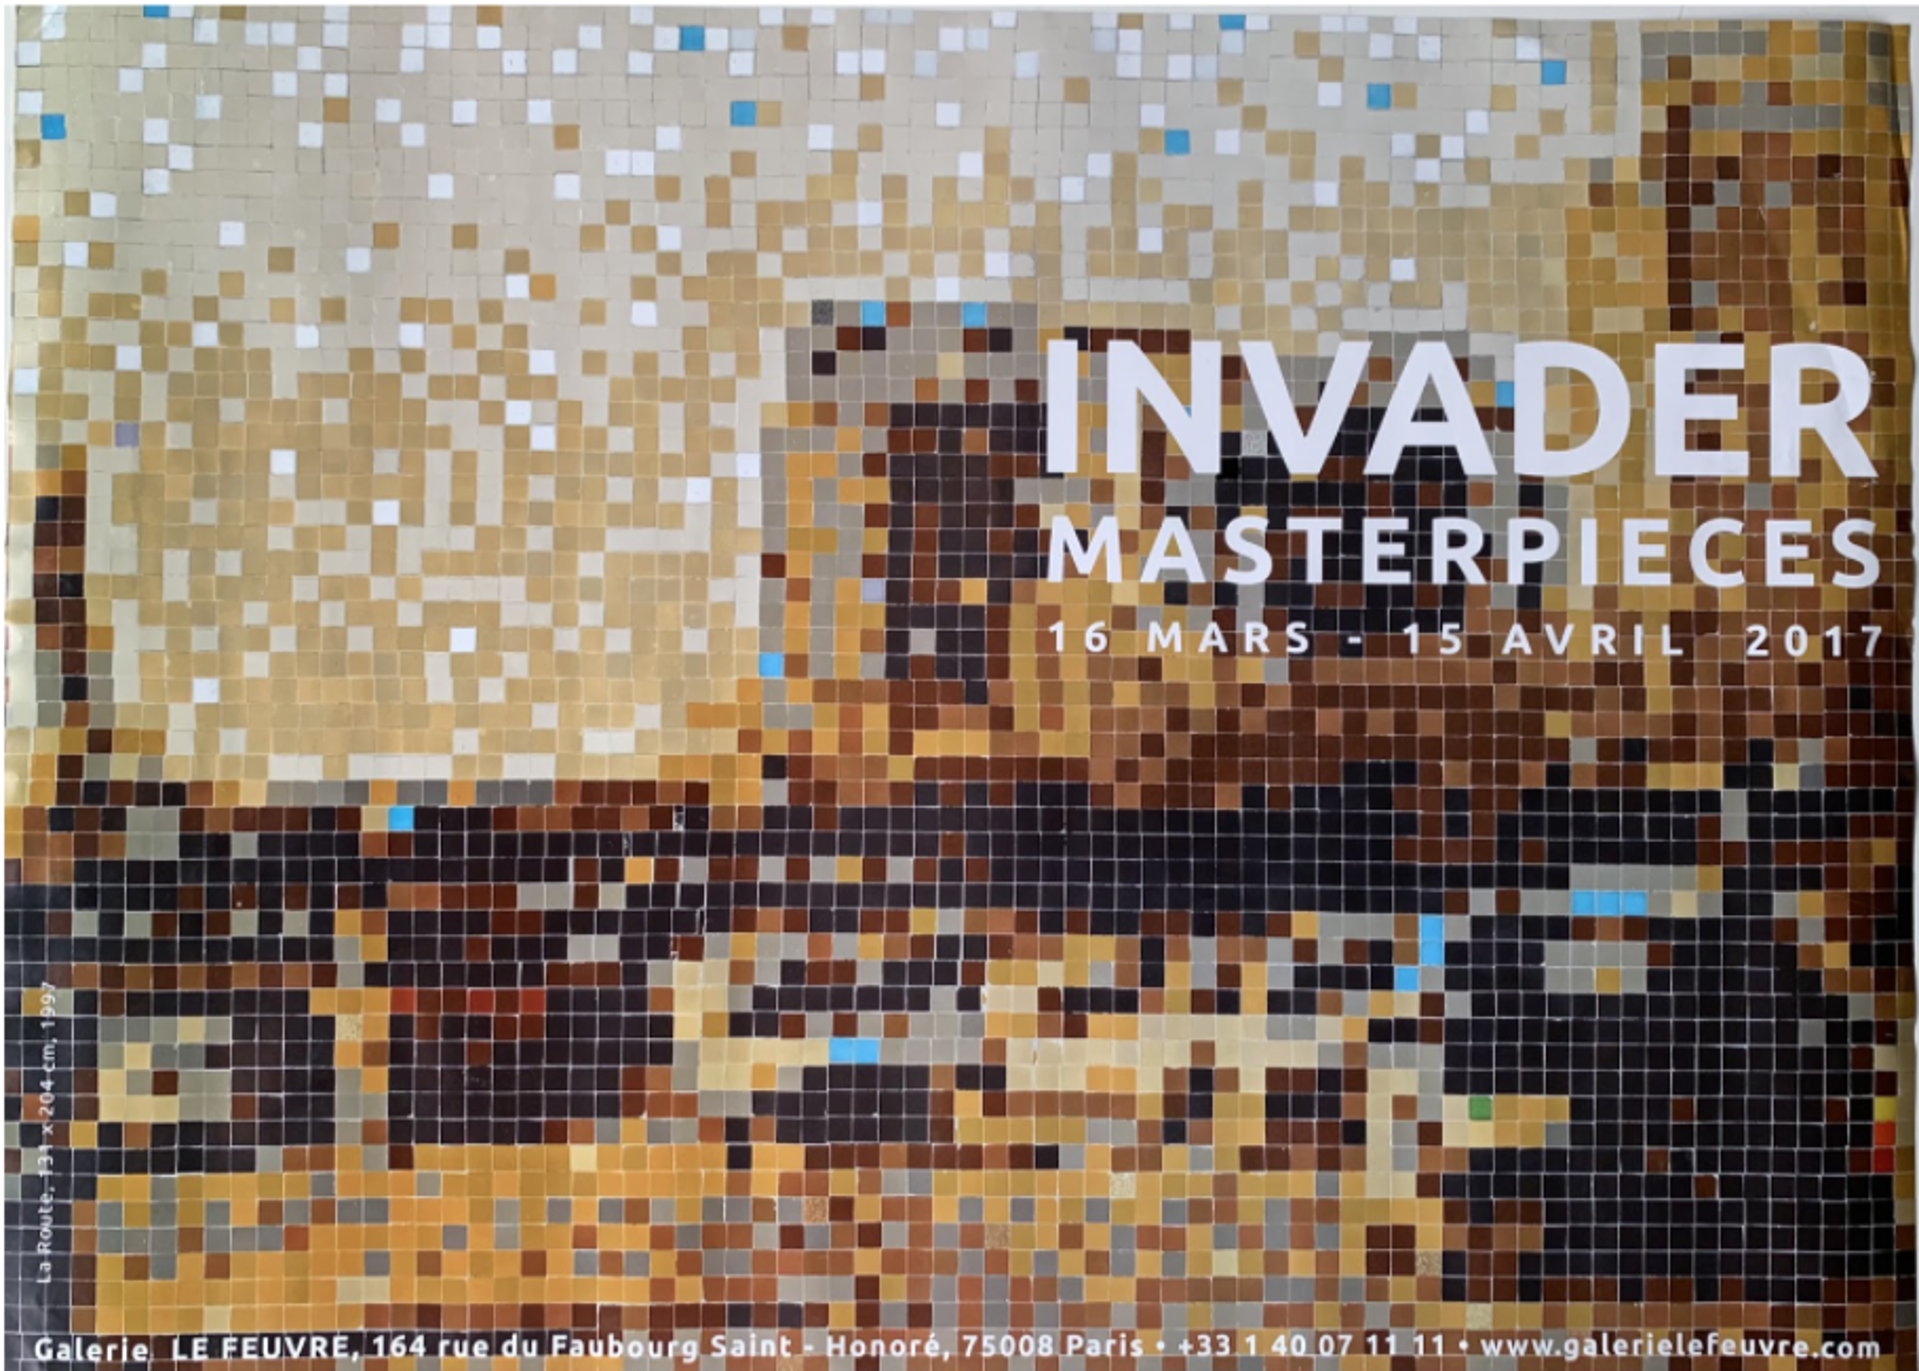 Exhibition Poster by Invader